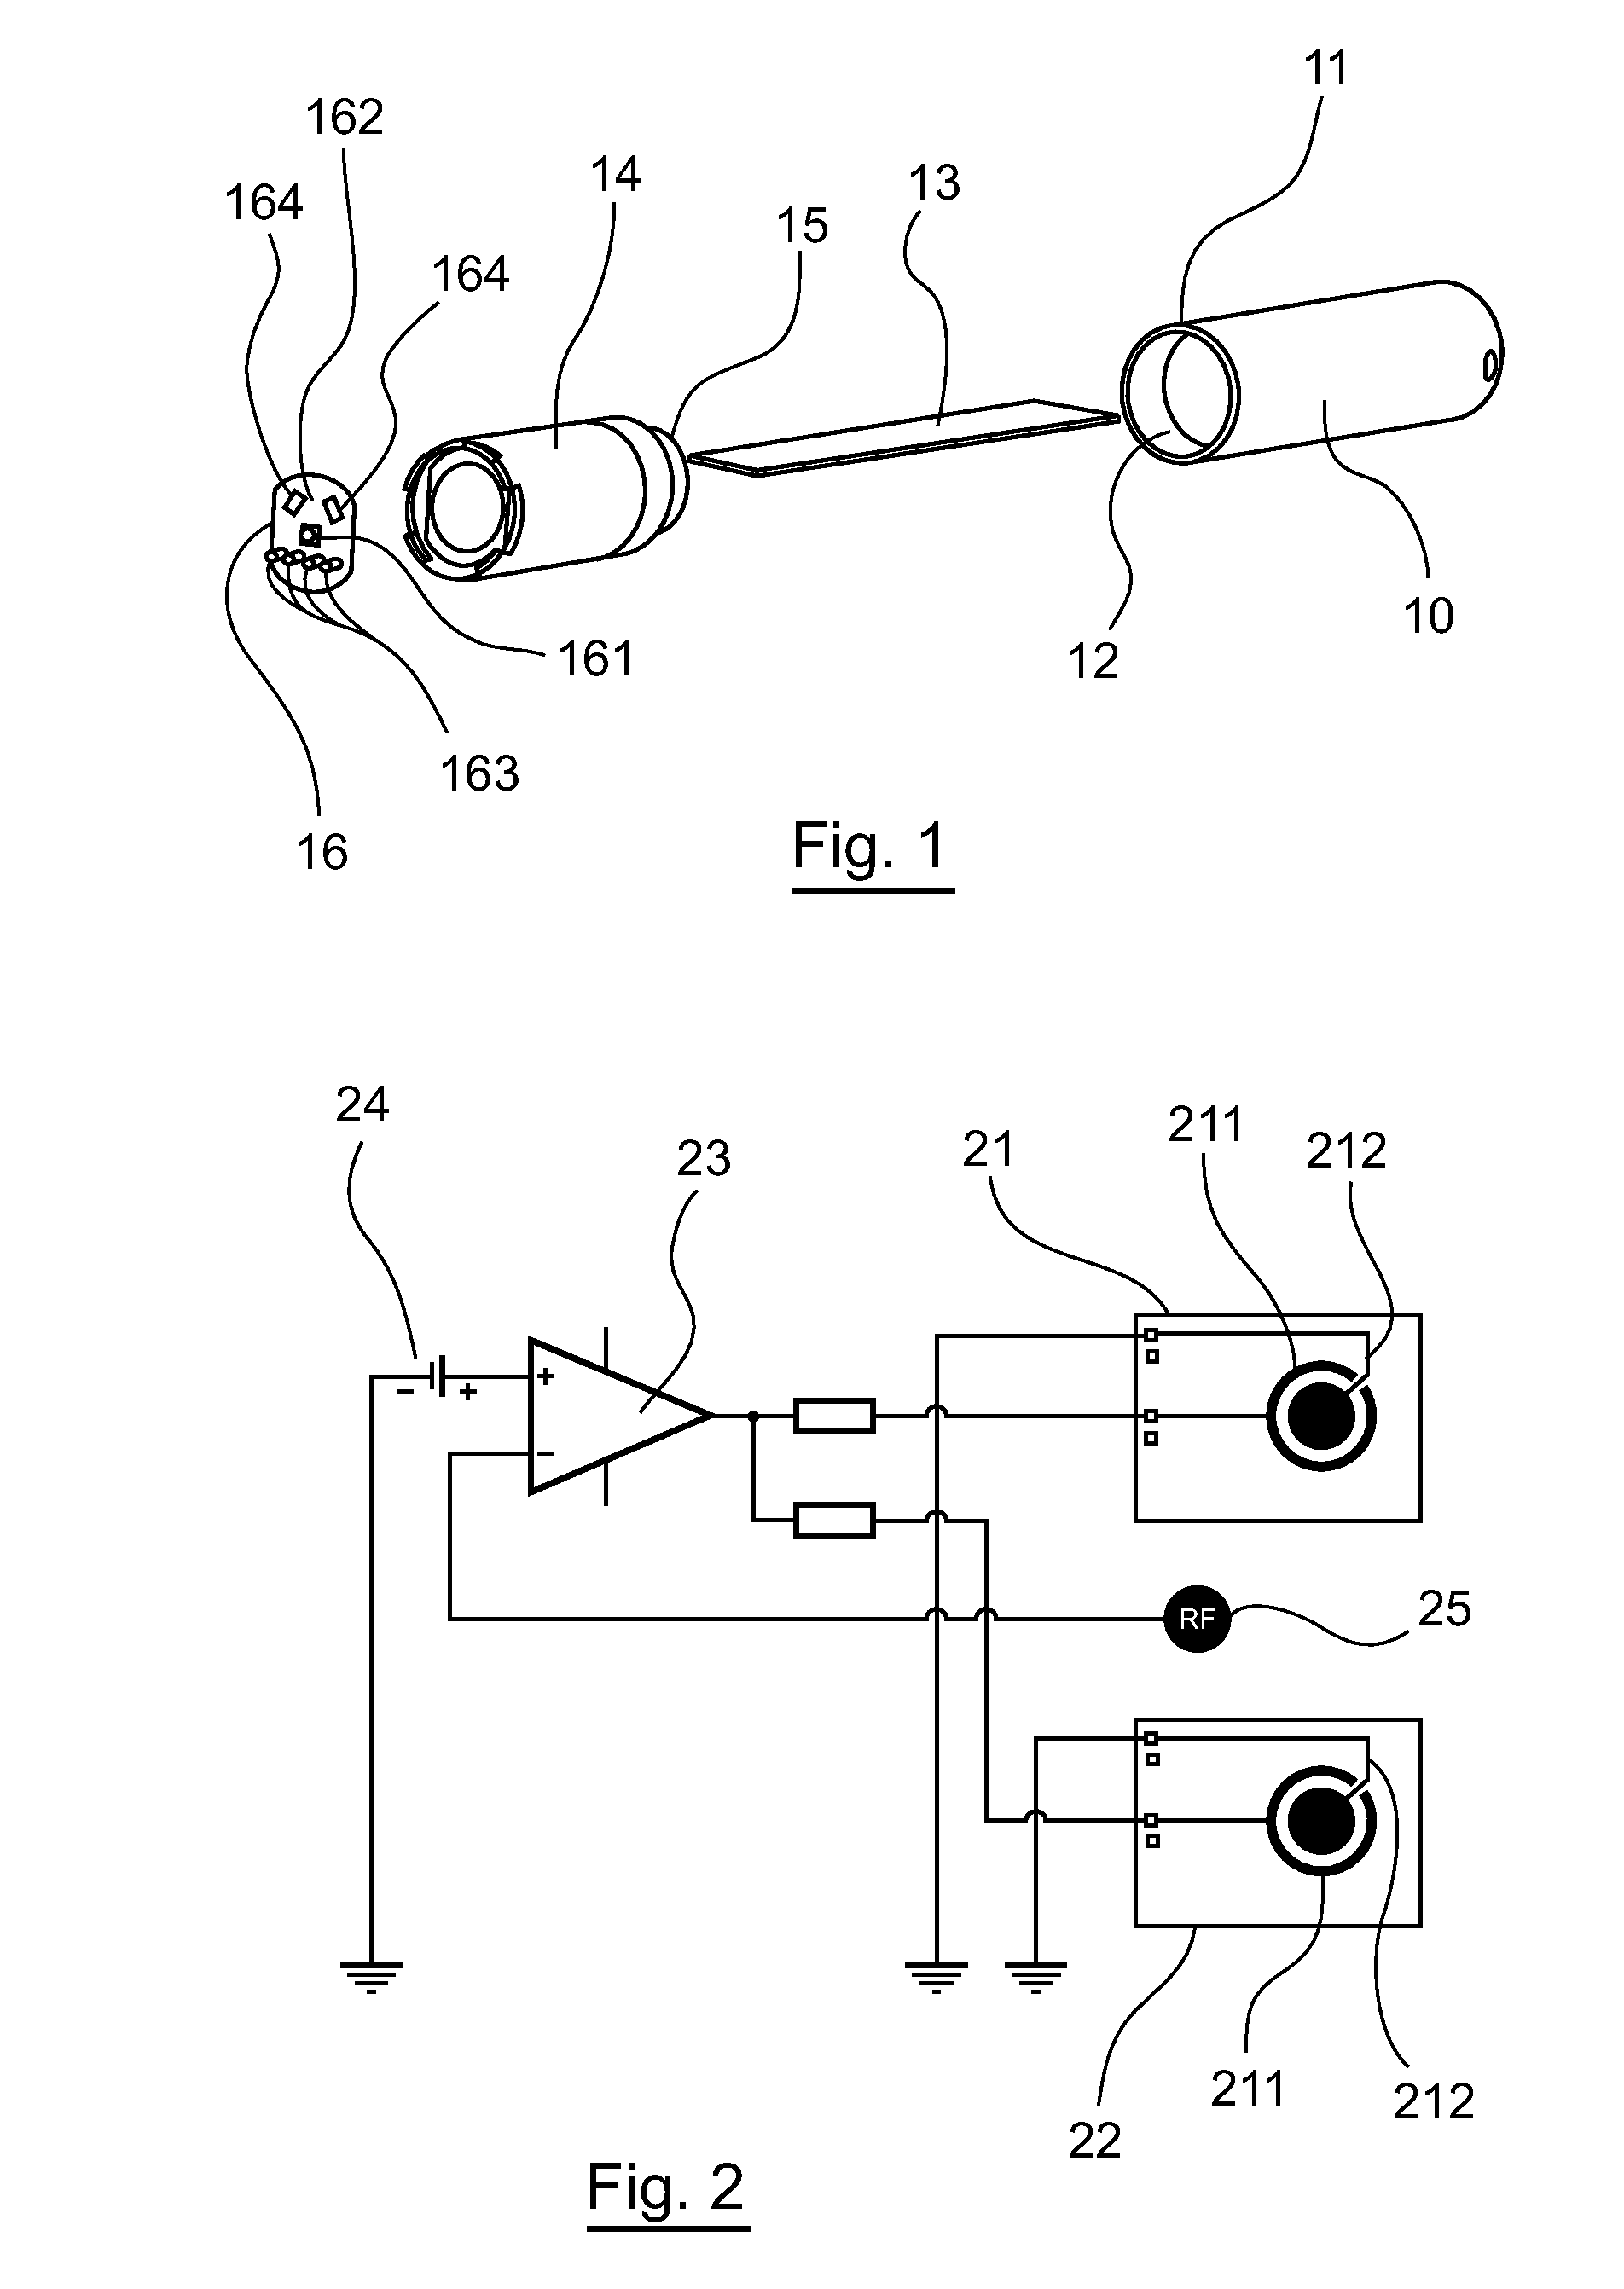 Device for Measuring at Least One Property of Water